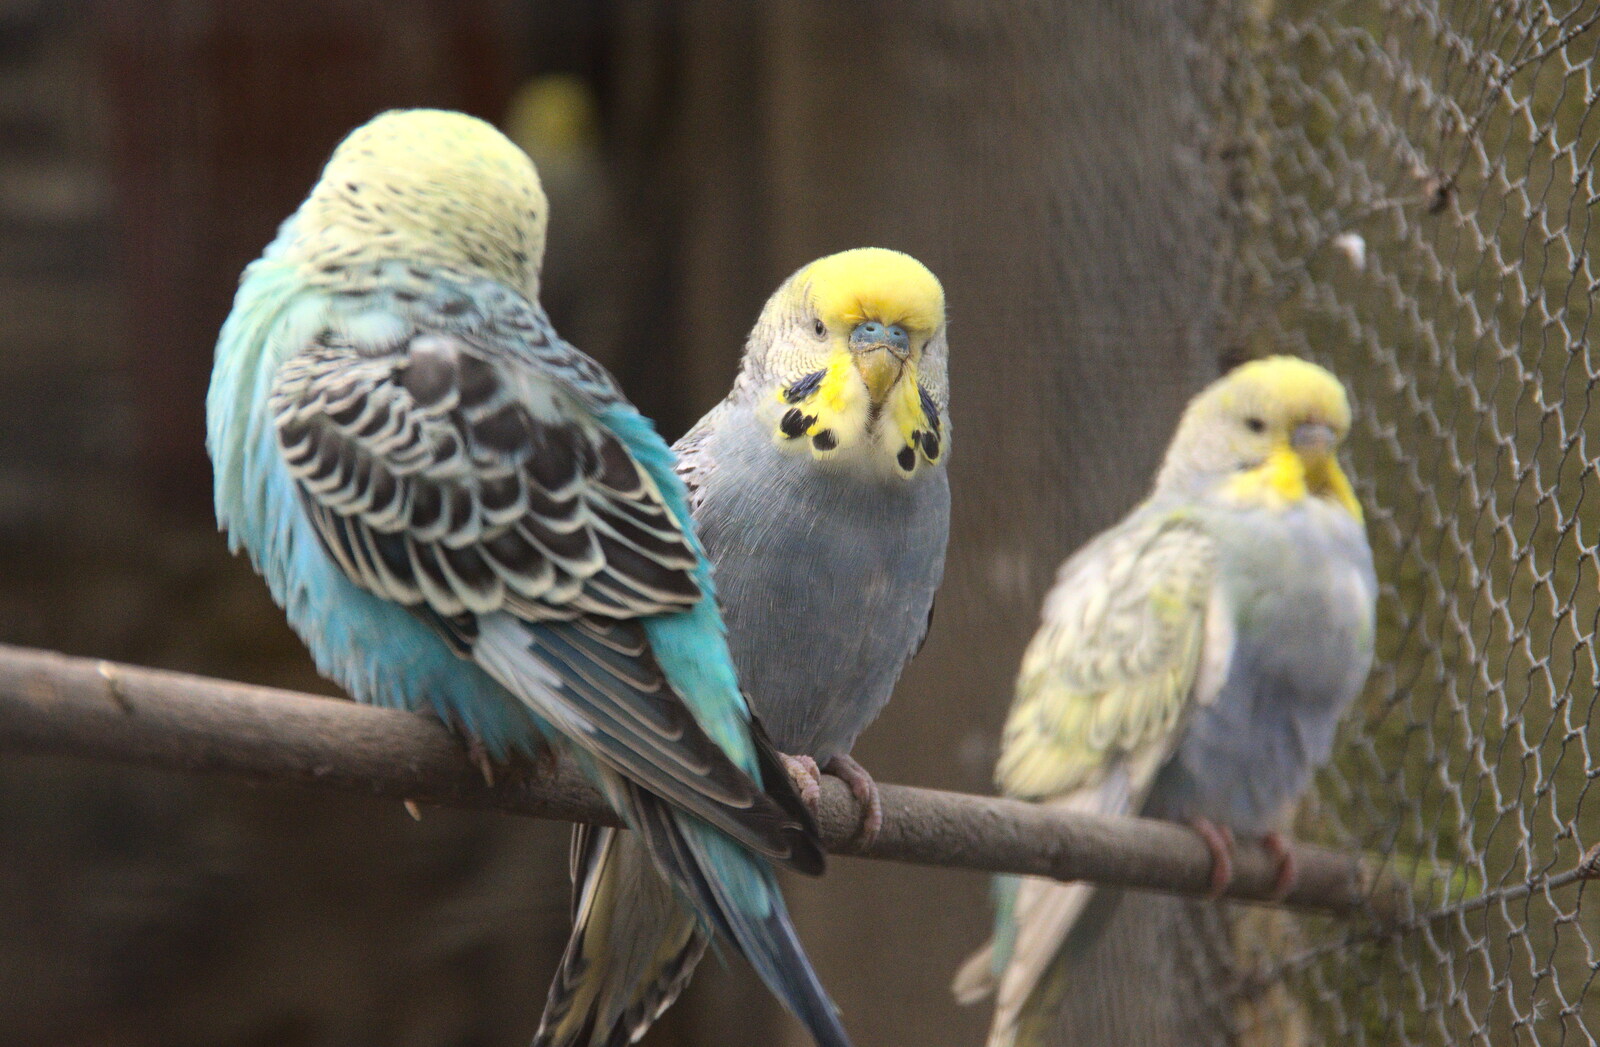 Budgerigars perch from A Few Hours in Bury St. Edmunds, Suffolk - 3rd January 2022